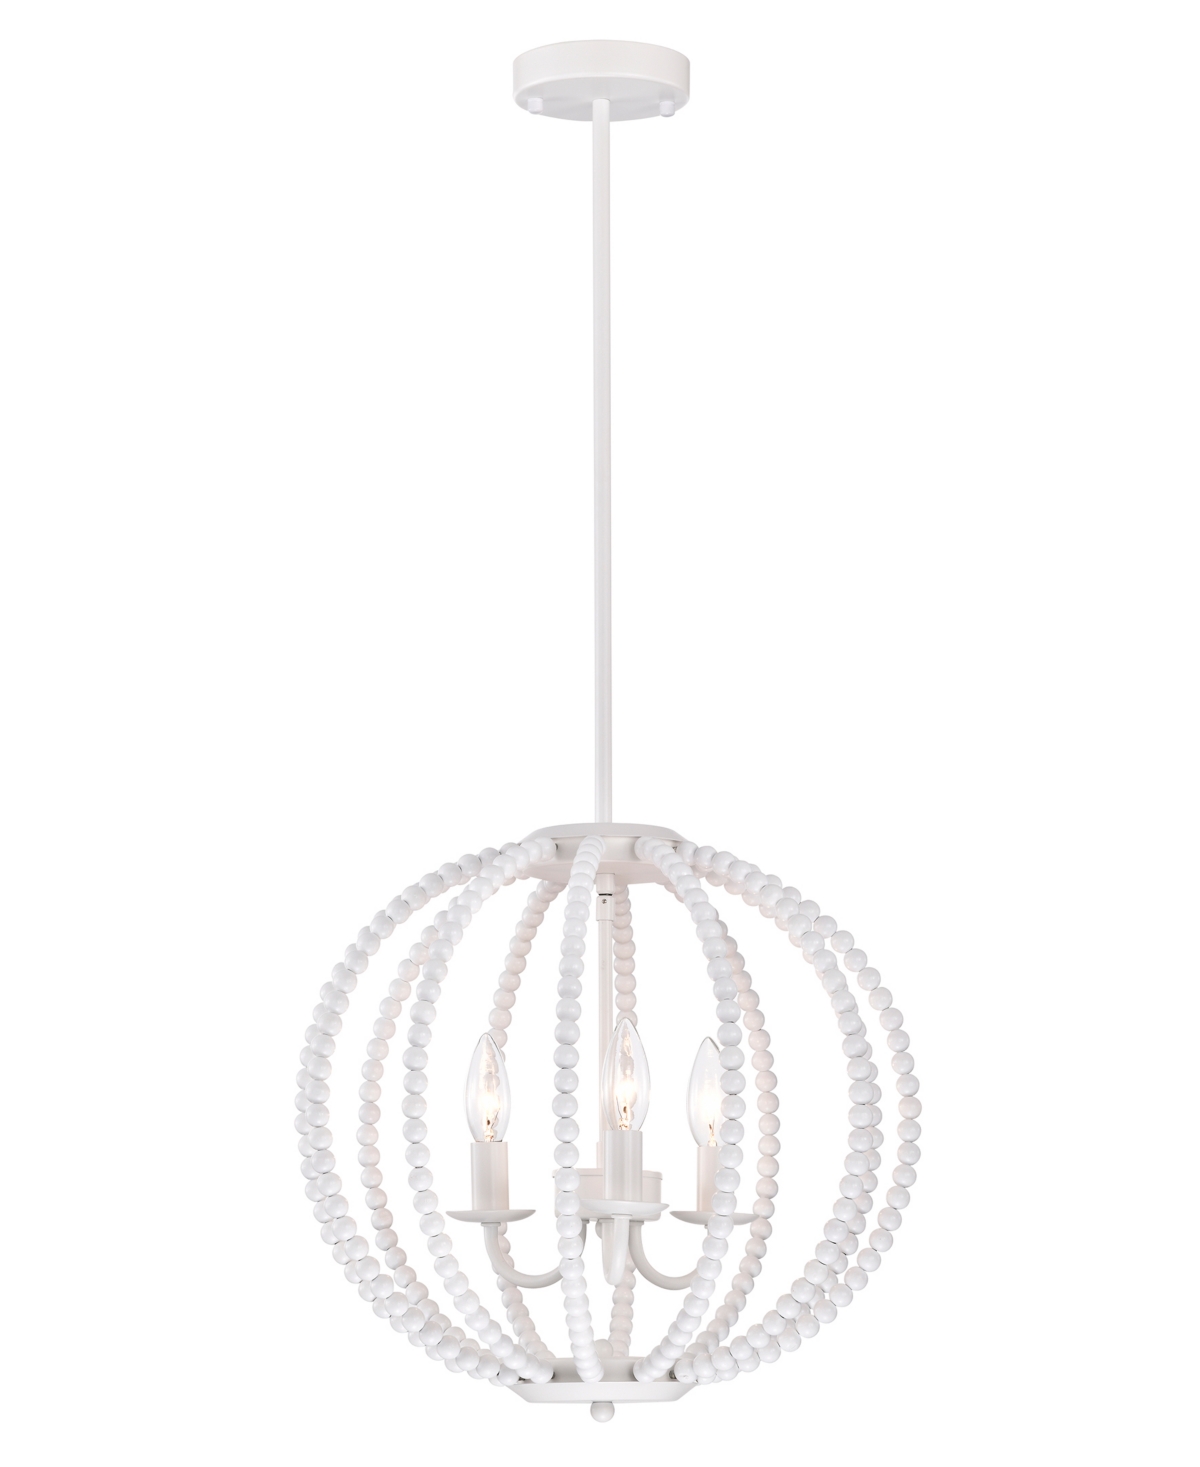 Home Accessories Arni 16" Indoor Finish Chandelier With Light Kit In Gloss White